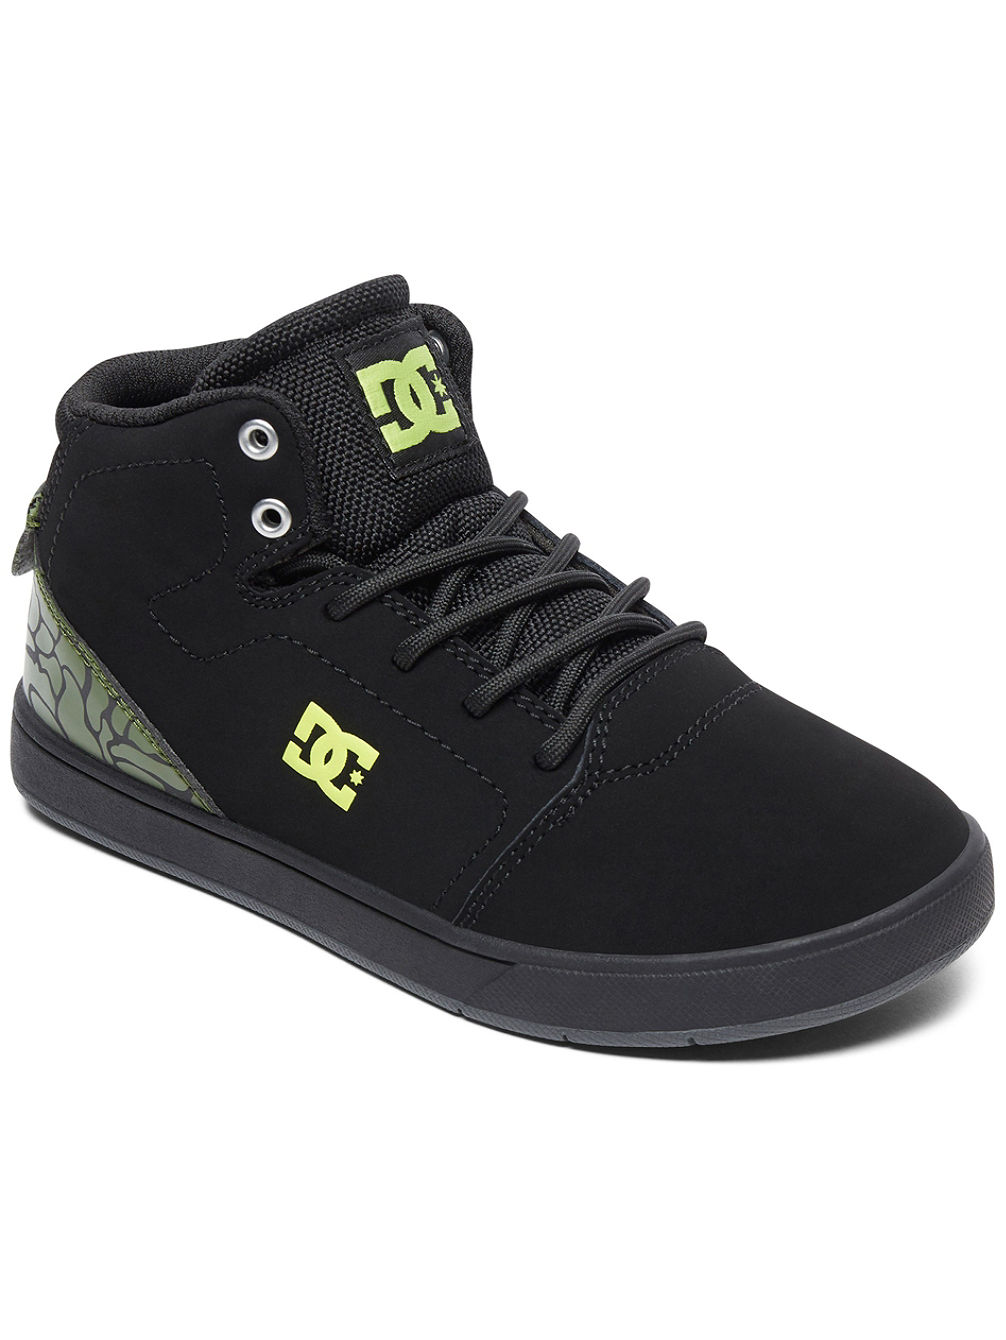 Crisis High SE Sneakers